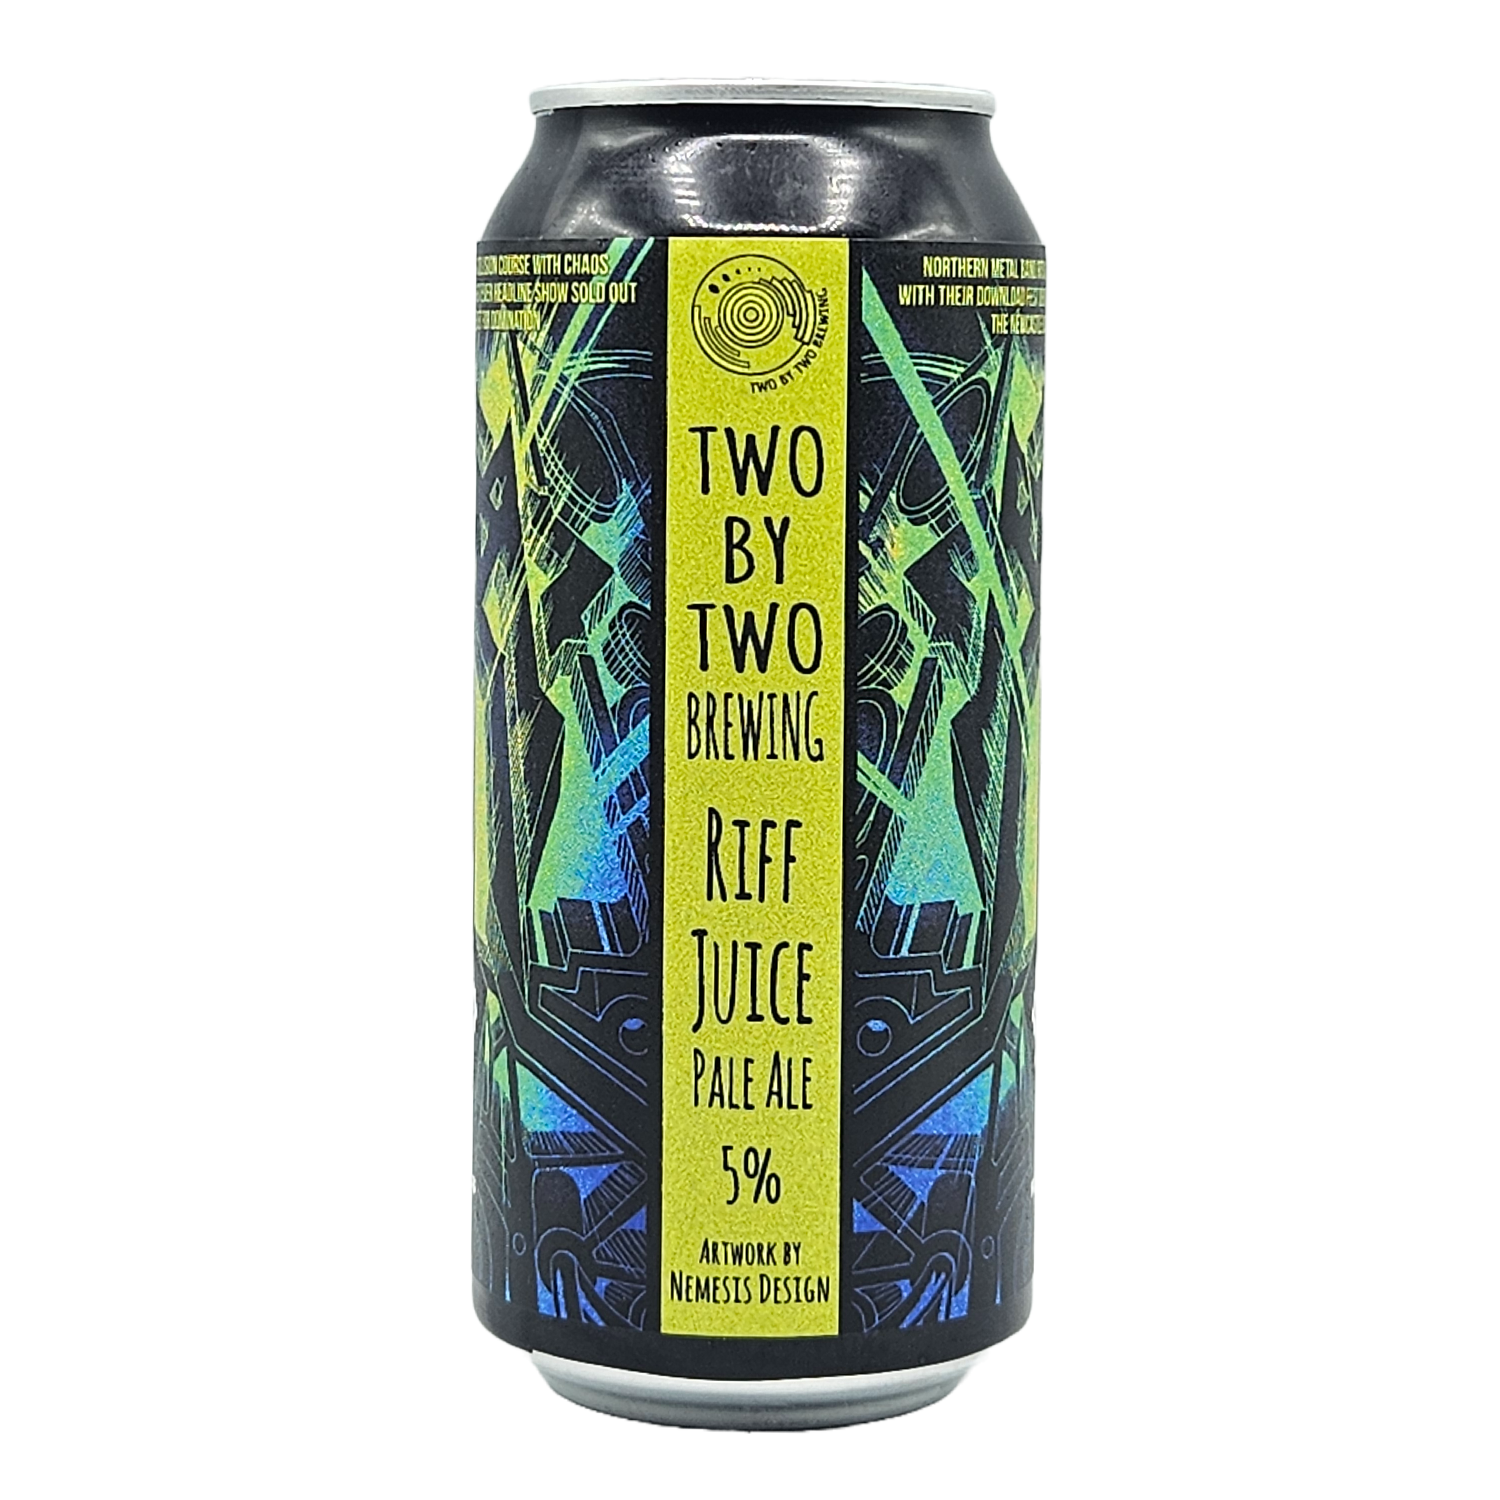 Two by Two x Rituals Riff Juice Pale Ale